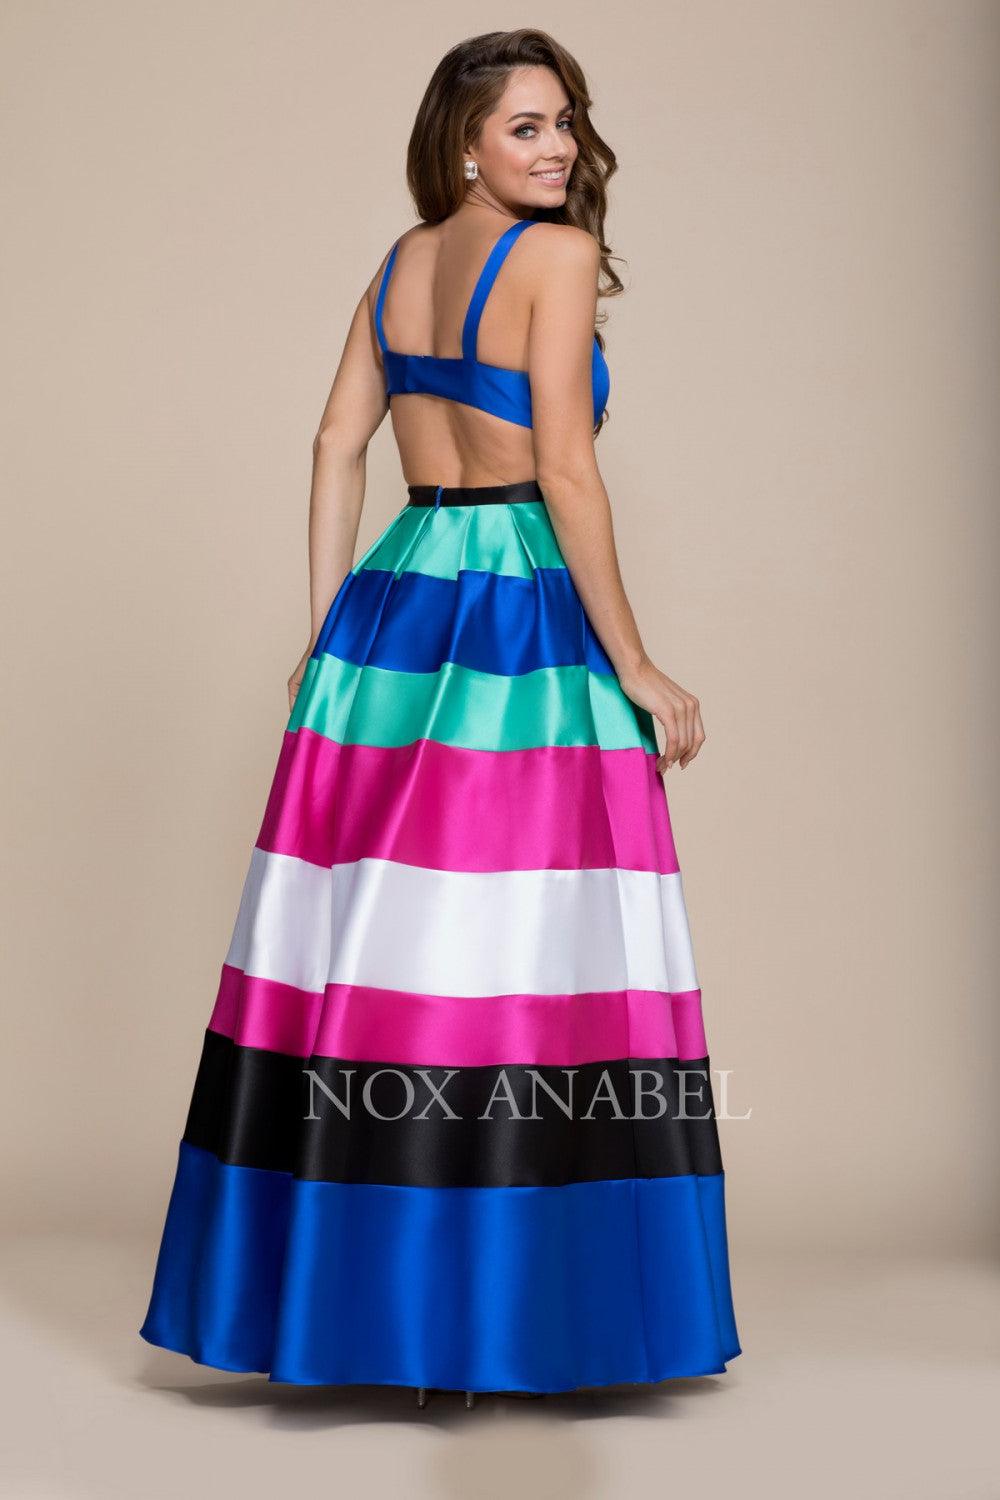 Long Multi Colored Sexy Prom Dress Evening Gown - The Dress Outlet Nox Anabel